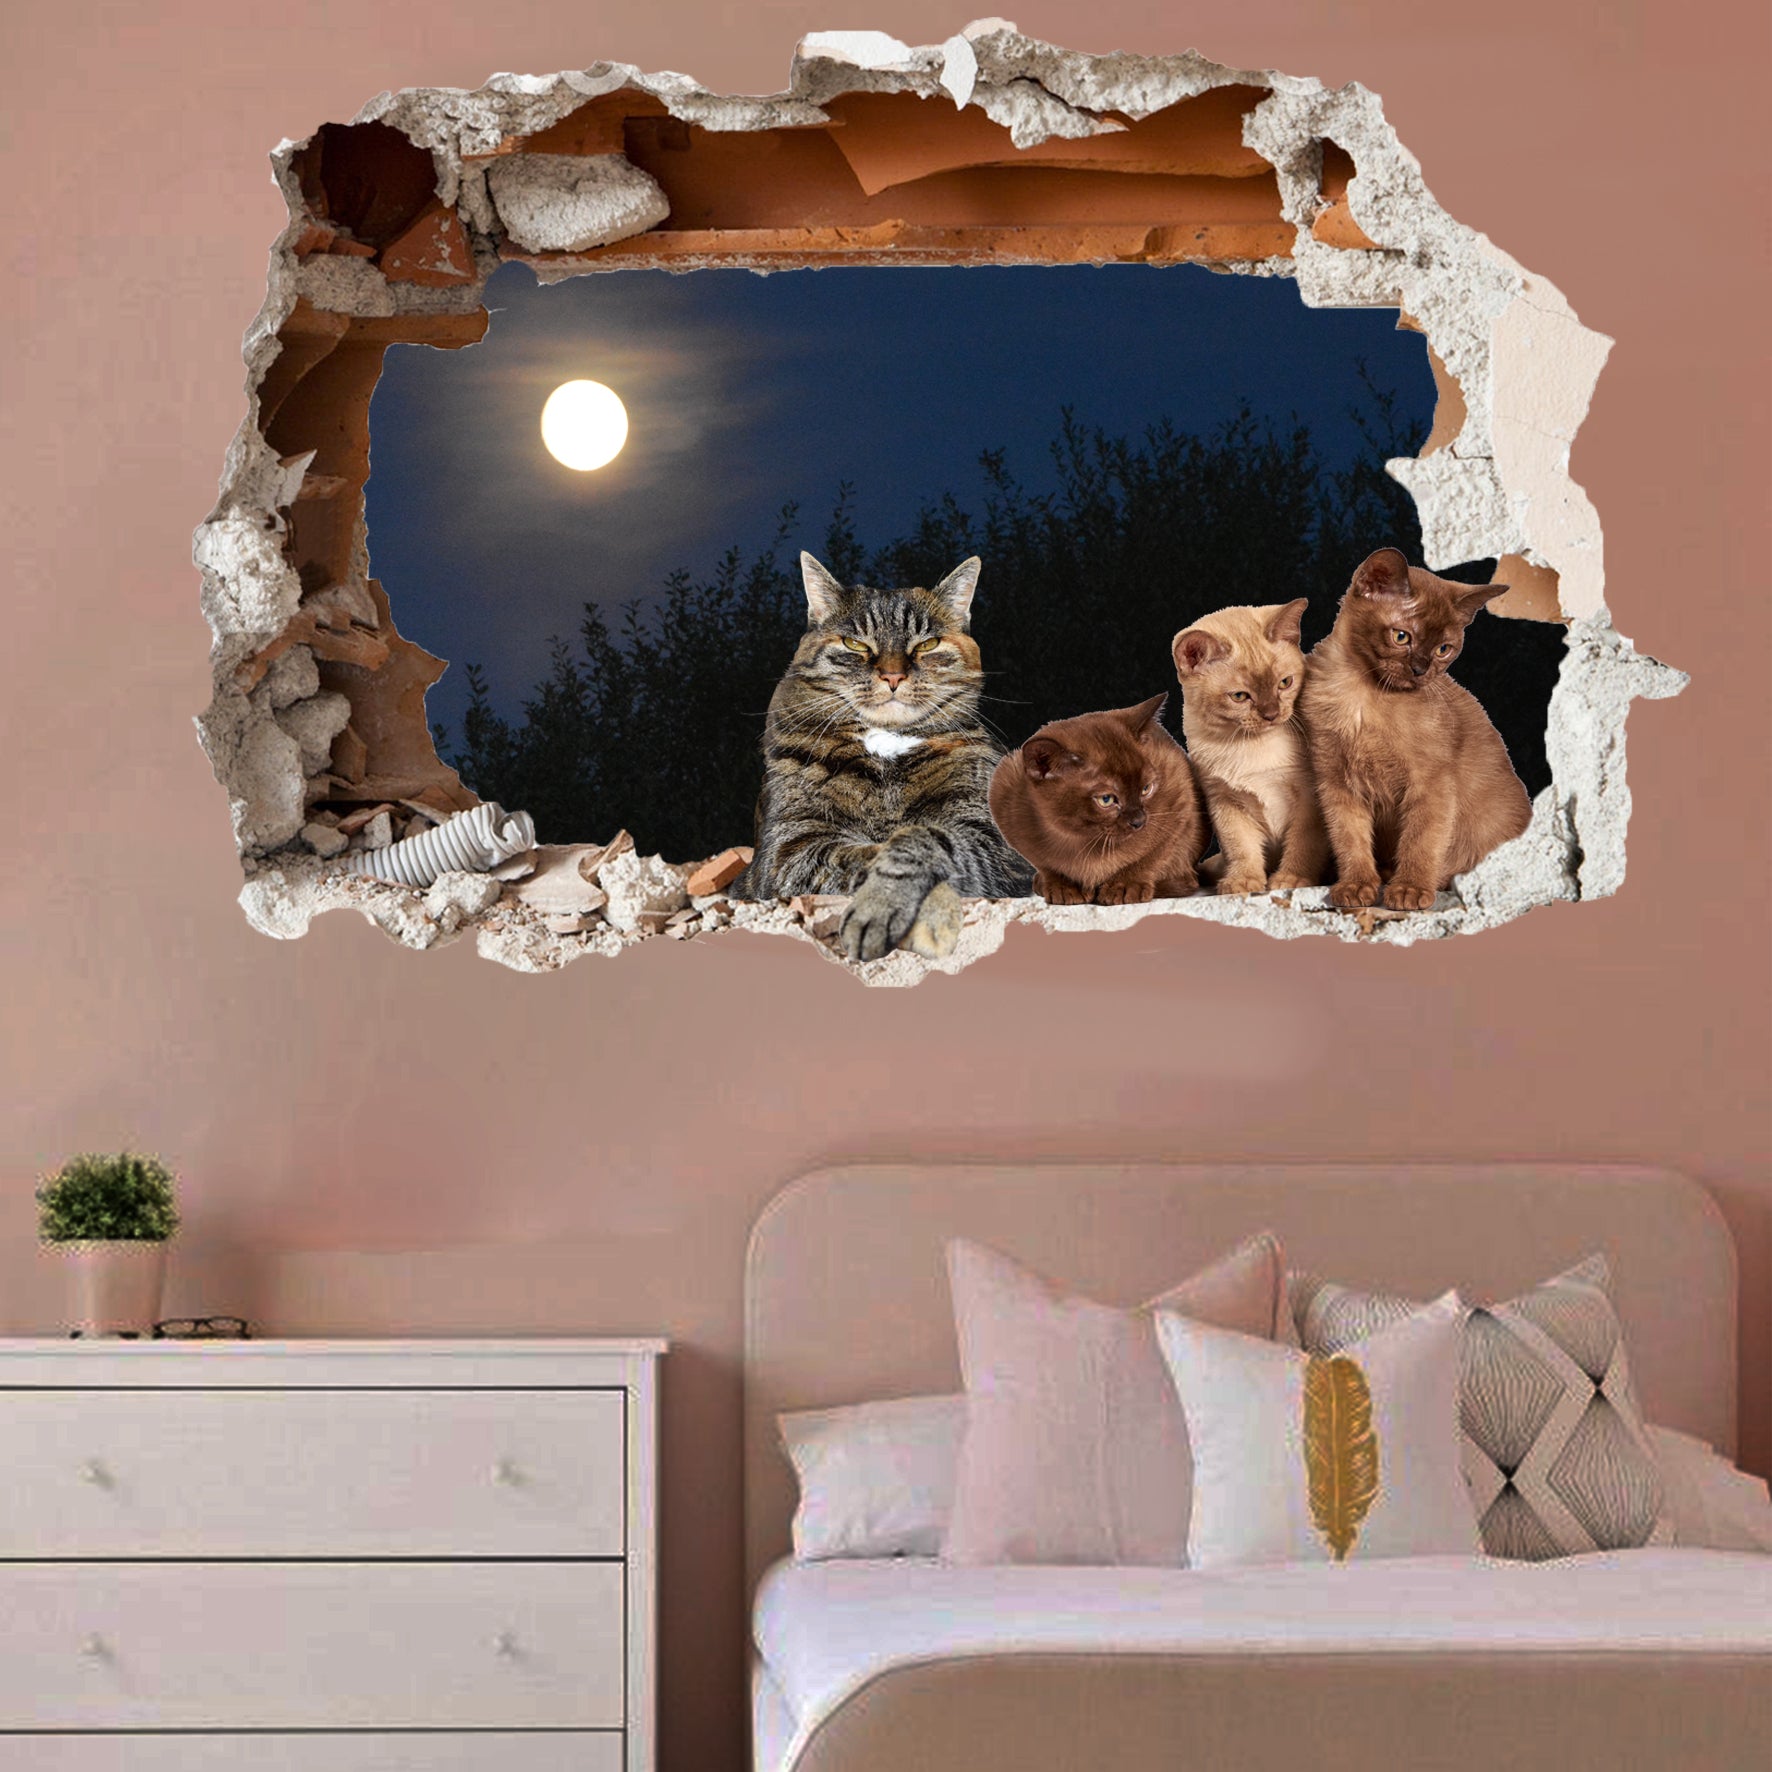 Cute Kittens and Cats wall sticker mural decal